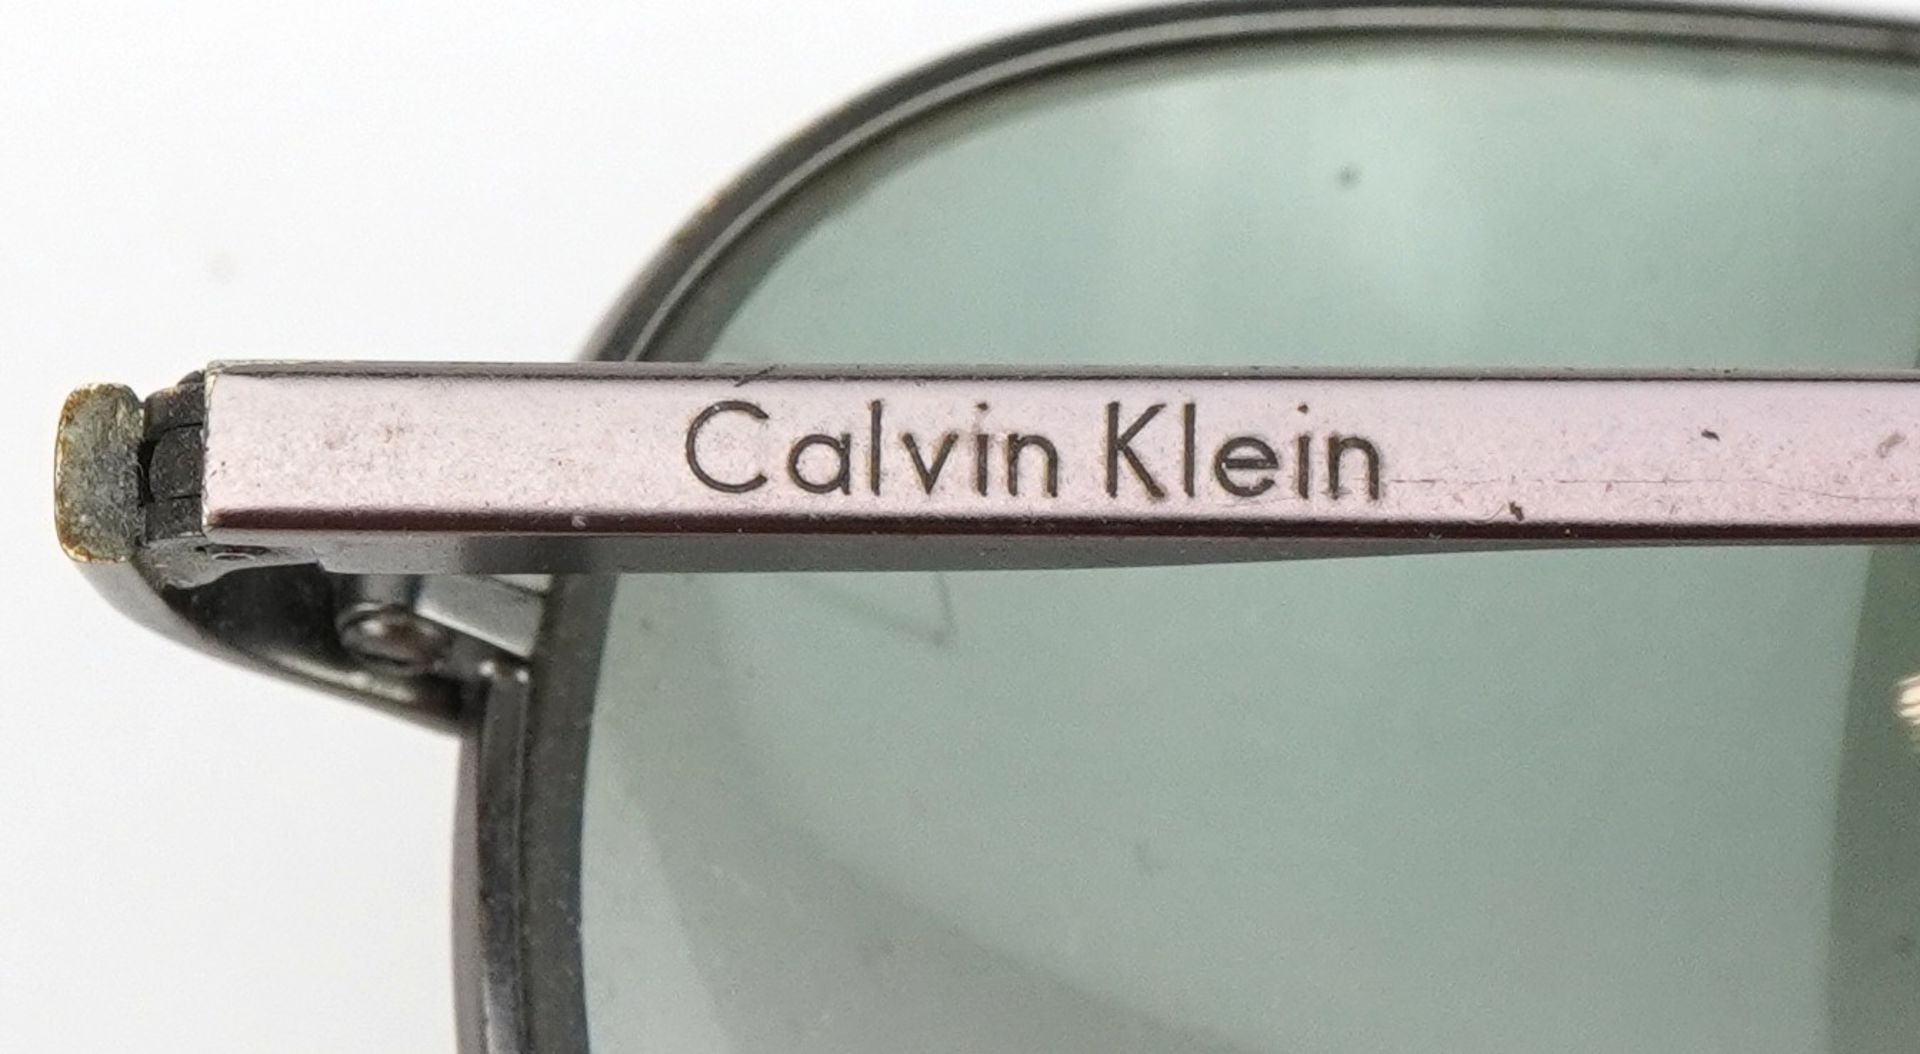 Three pairs of vintage sunglasses including RayBan and Calvin Klein - Image 3 of 3